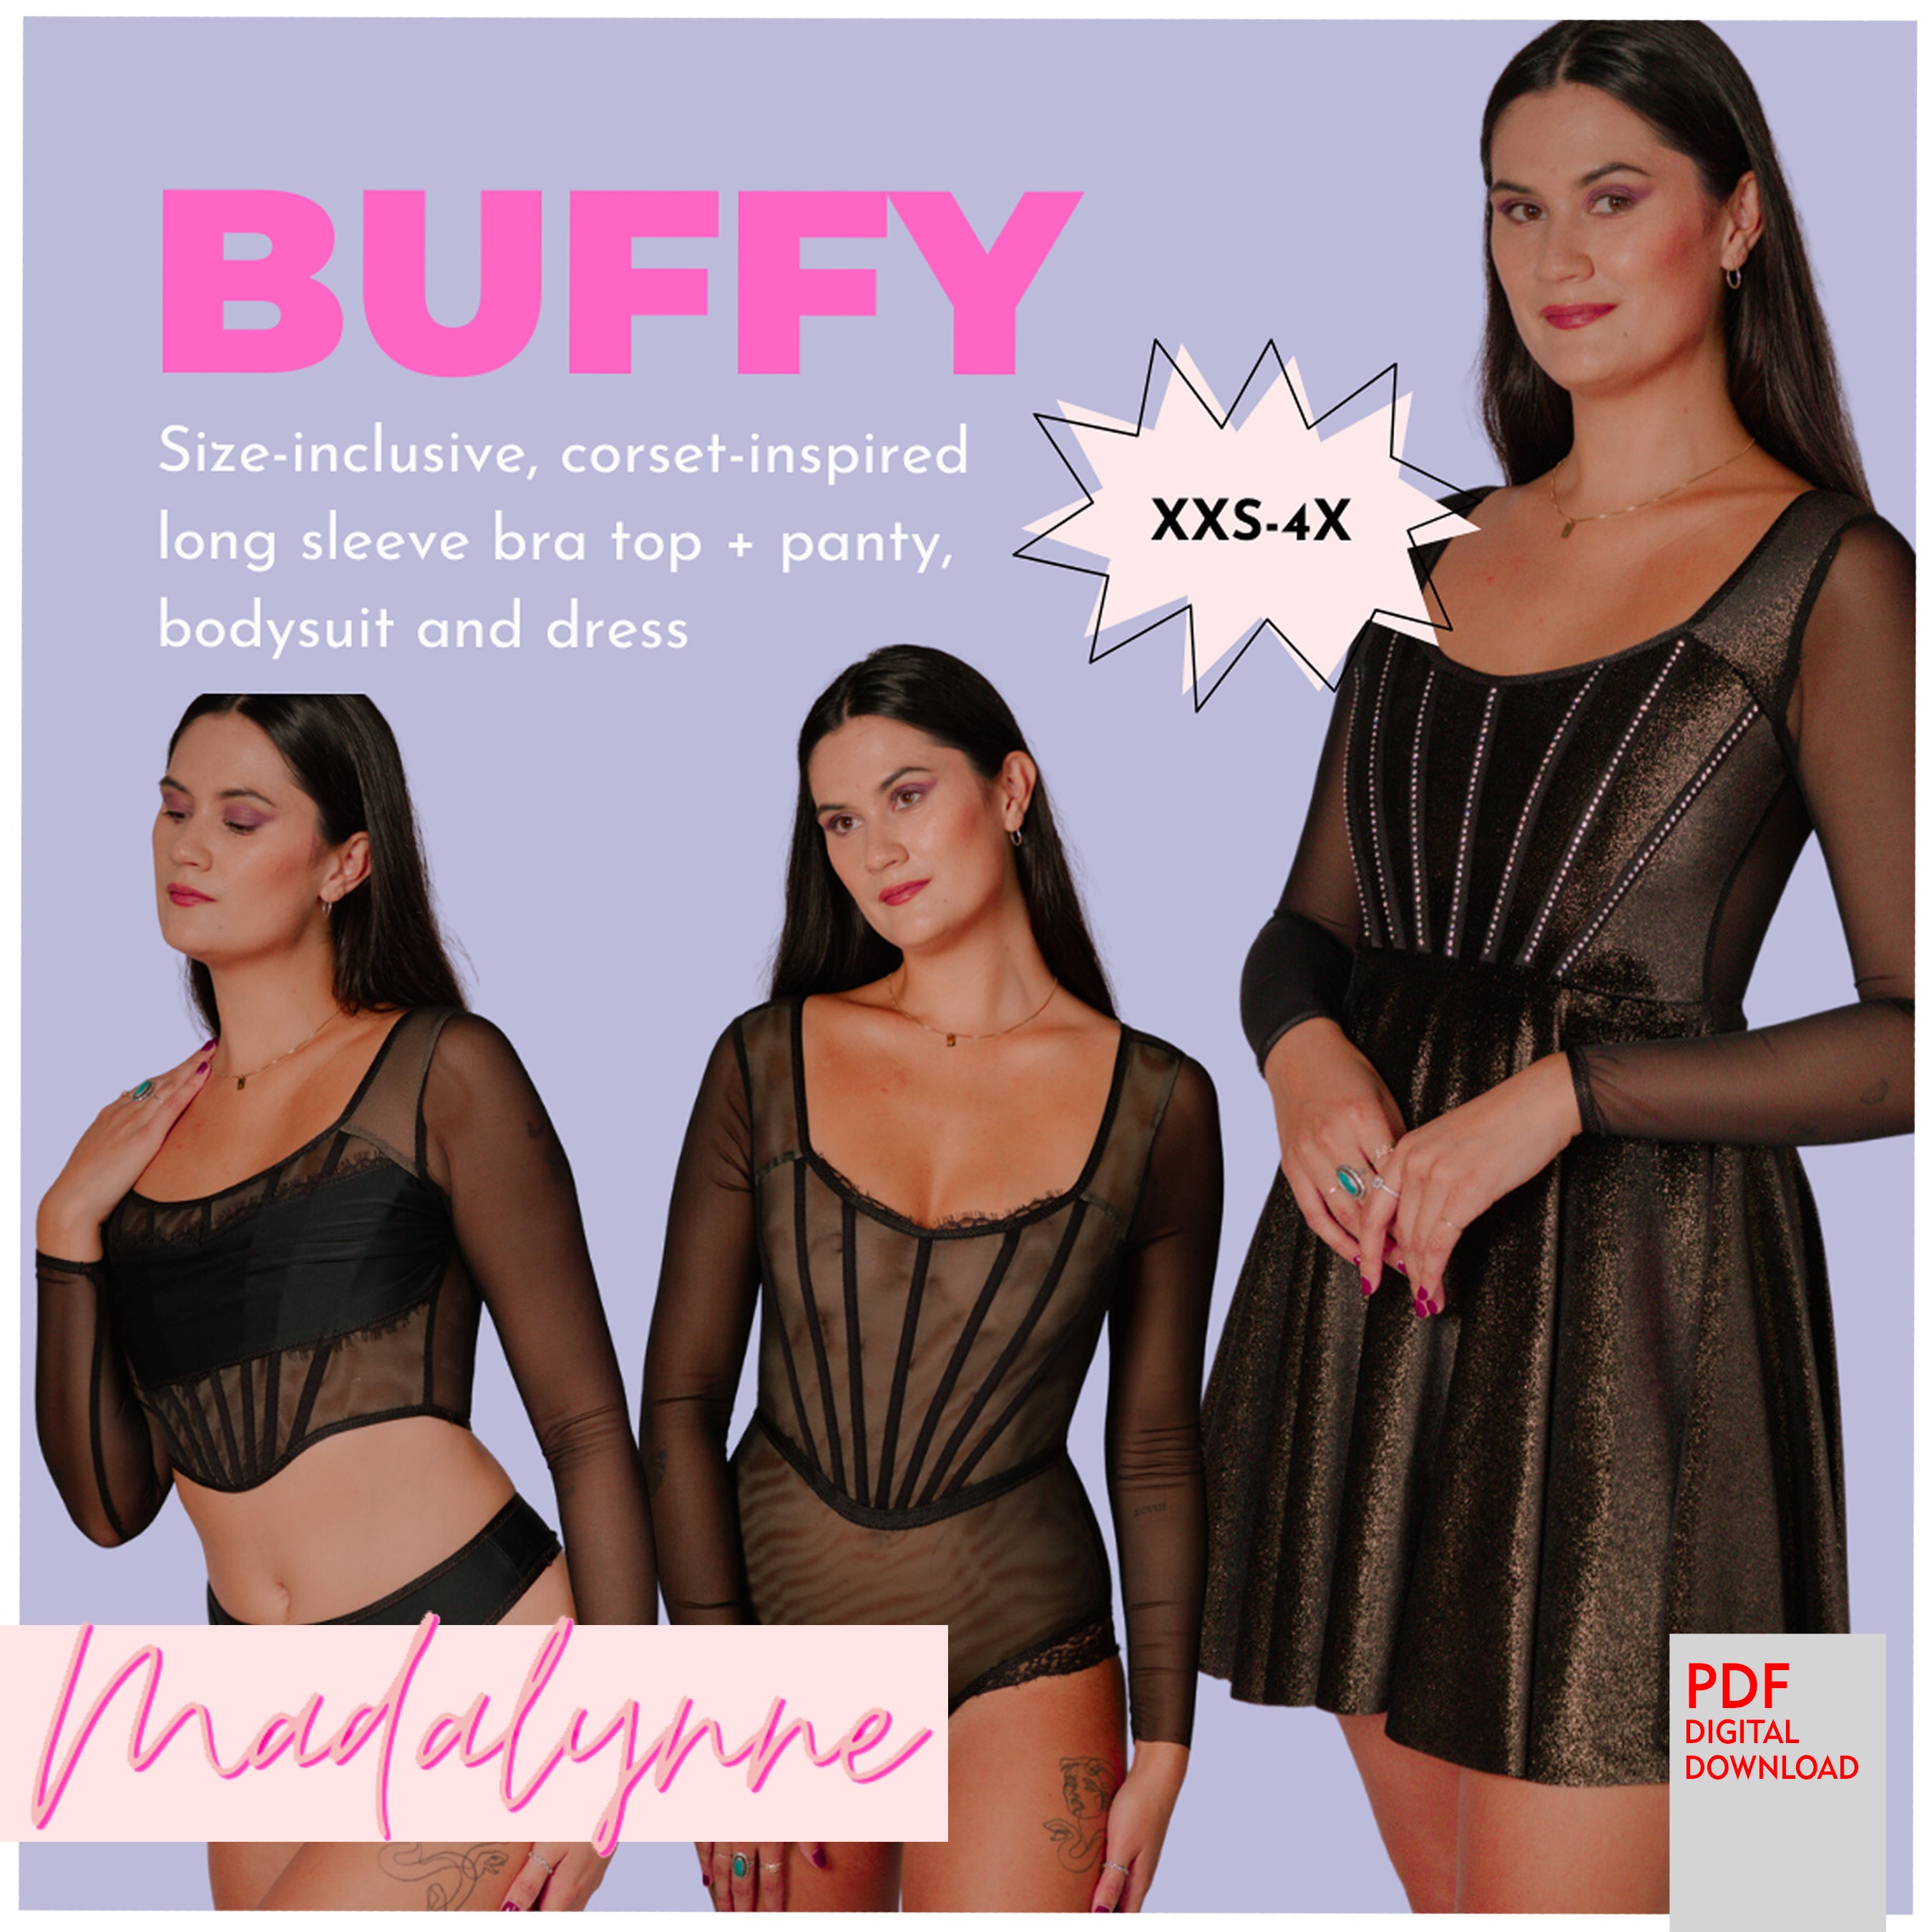 PDF Madalynne Sewing Pattern- Buffy Corset Top and Panty, Bodysuit and Dress